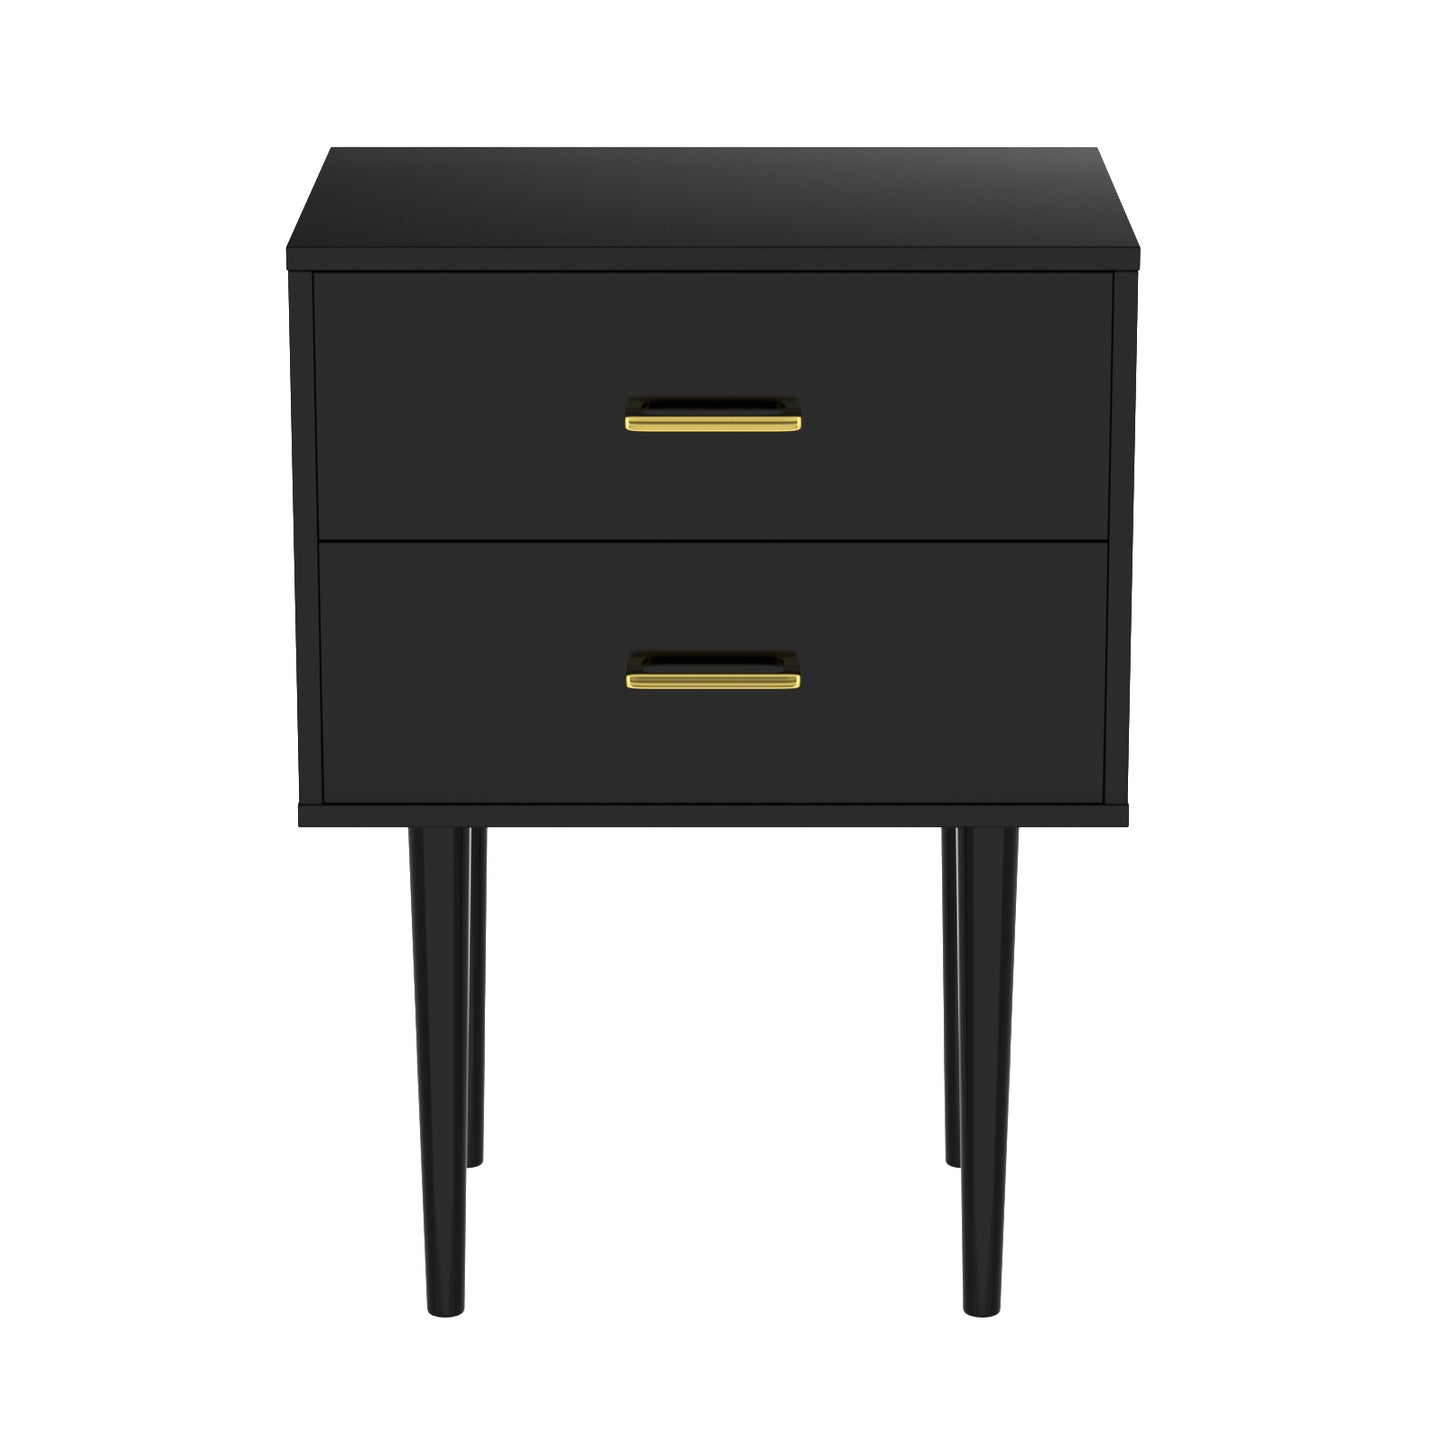 Semiocthome Modern 2 Drawers Nightstand,Bedside Table for Bedroom,Adult